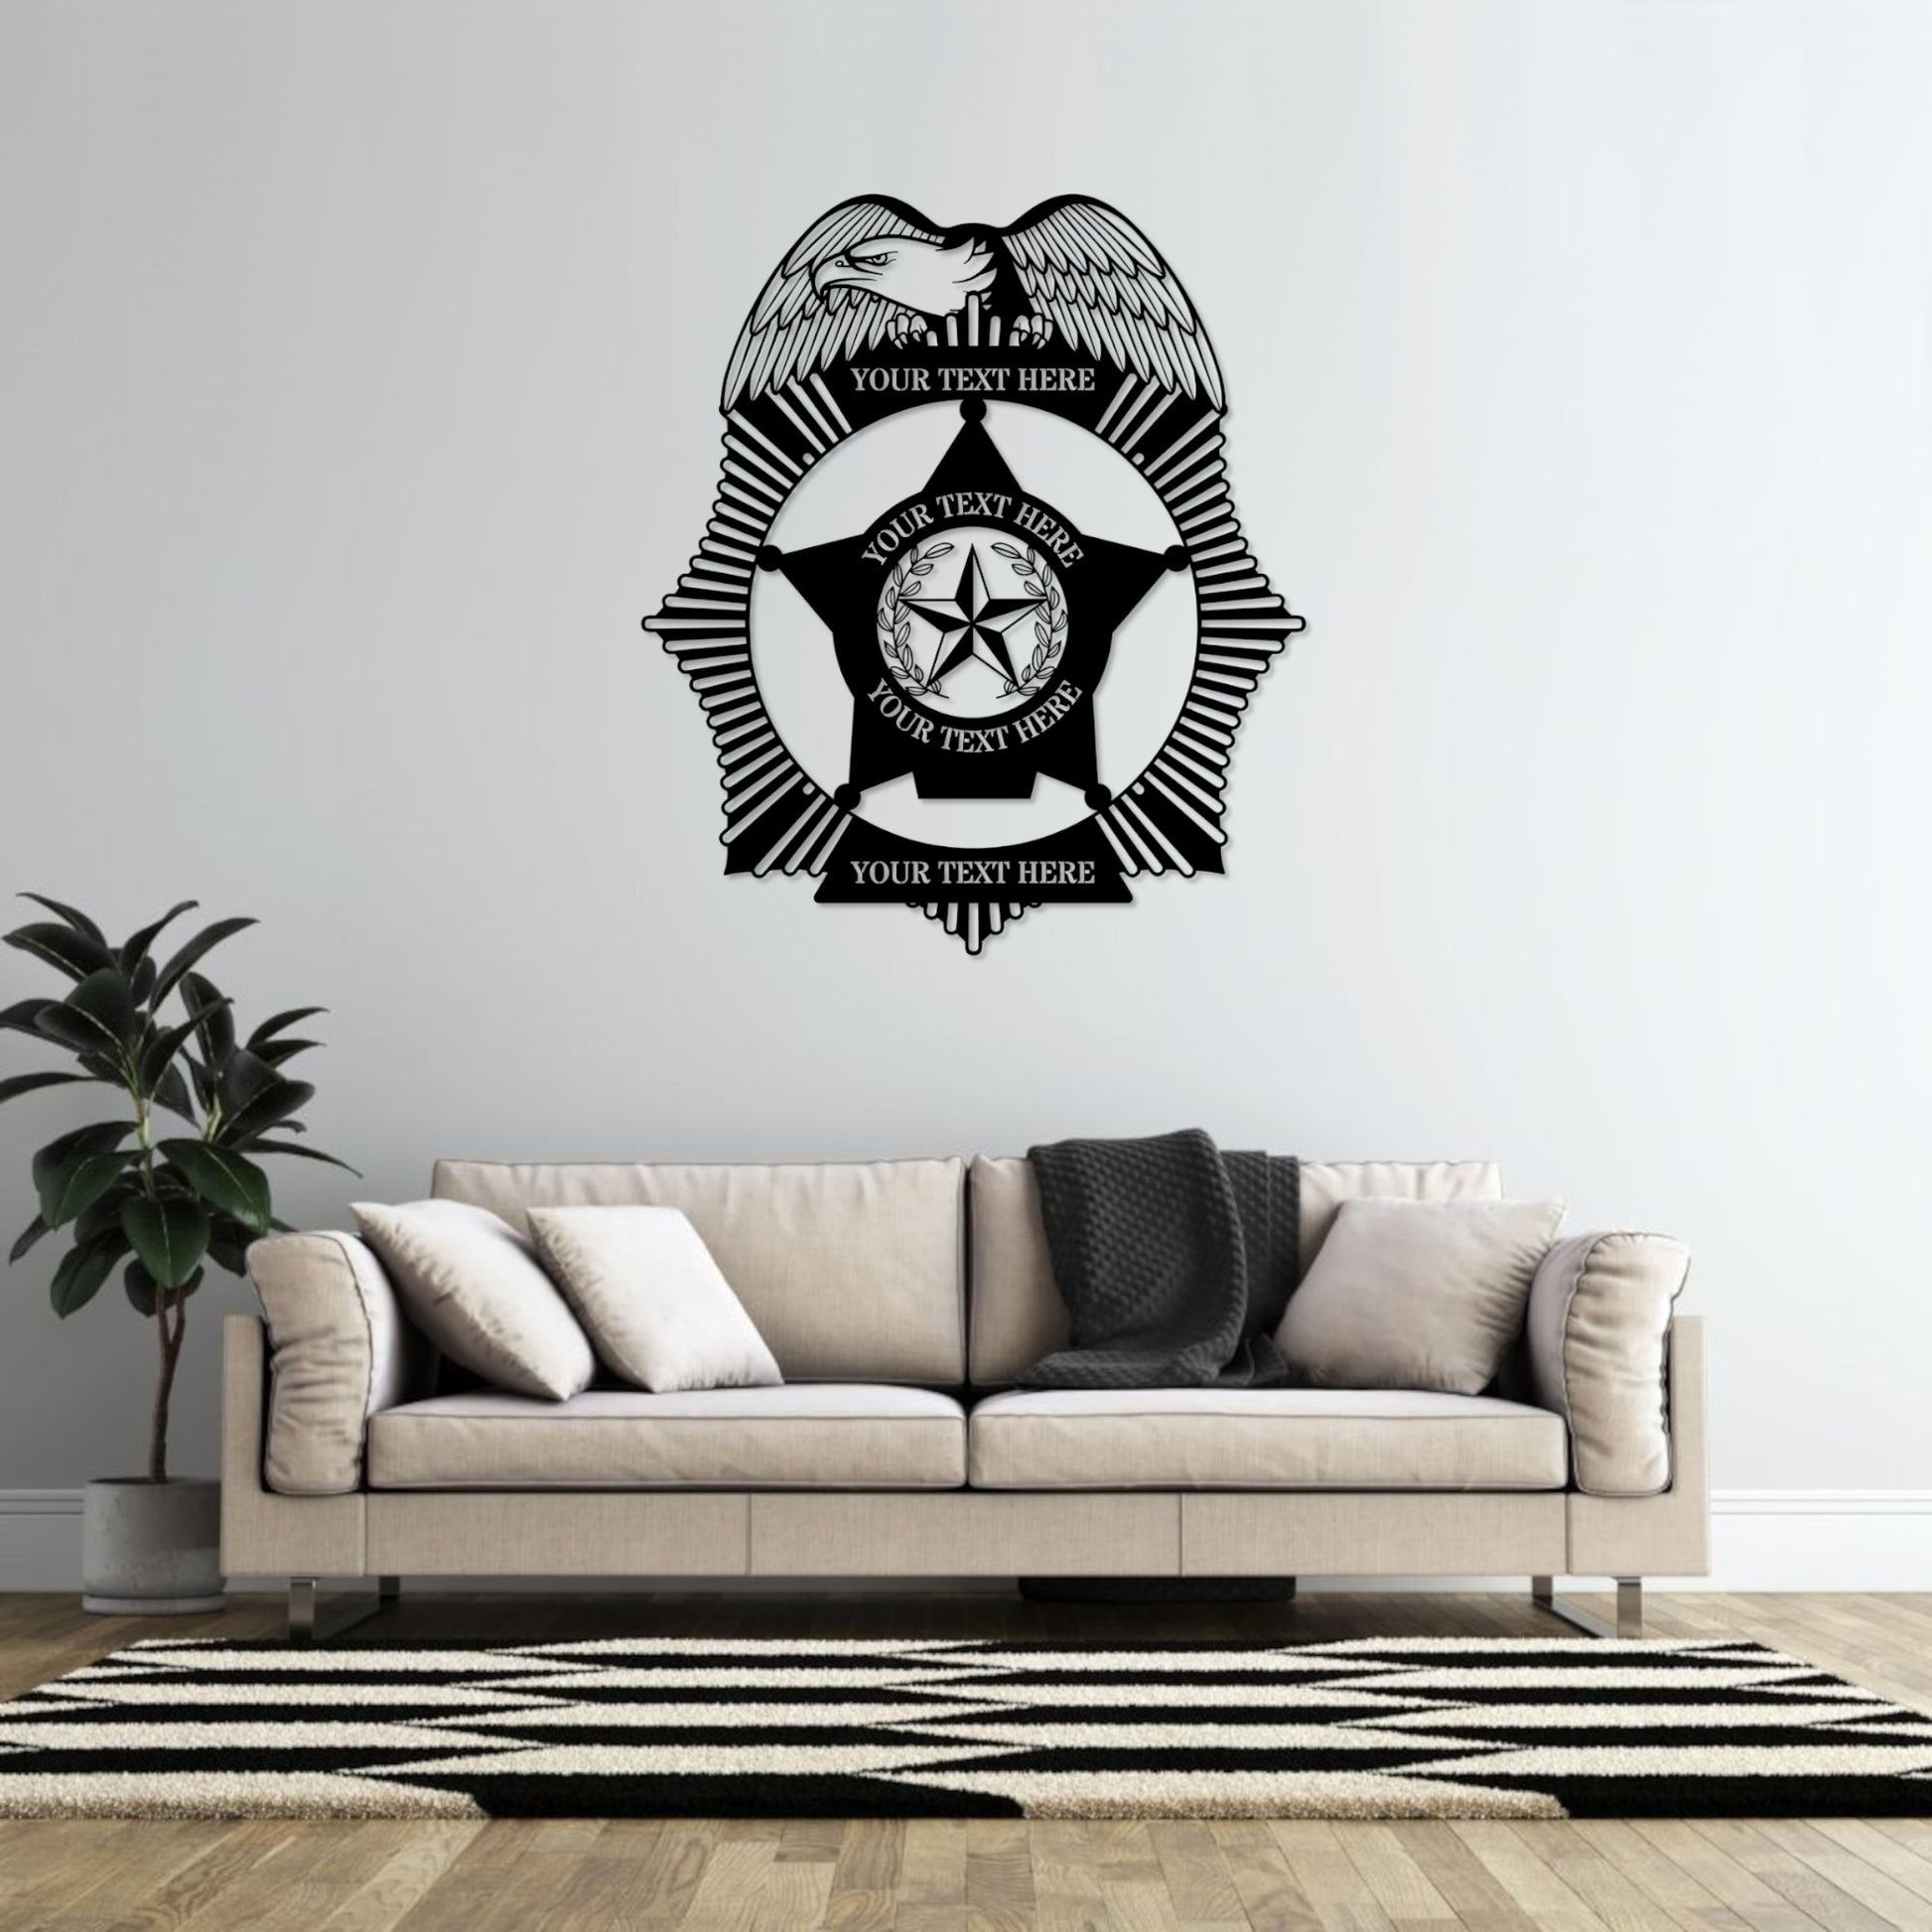 Personalized Eagle Police Badge Metal Sign. Custom Cop Badge Wall Decor Gift. Officer. Lieutenant. Investigator. Police Force Art. Lawmen